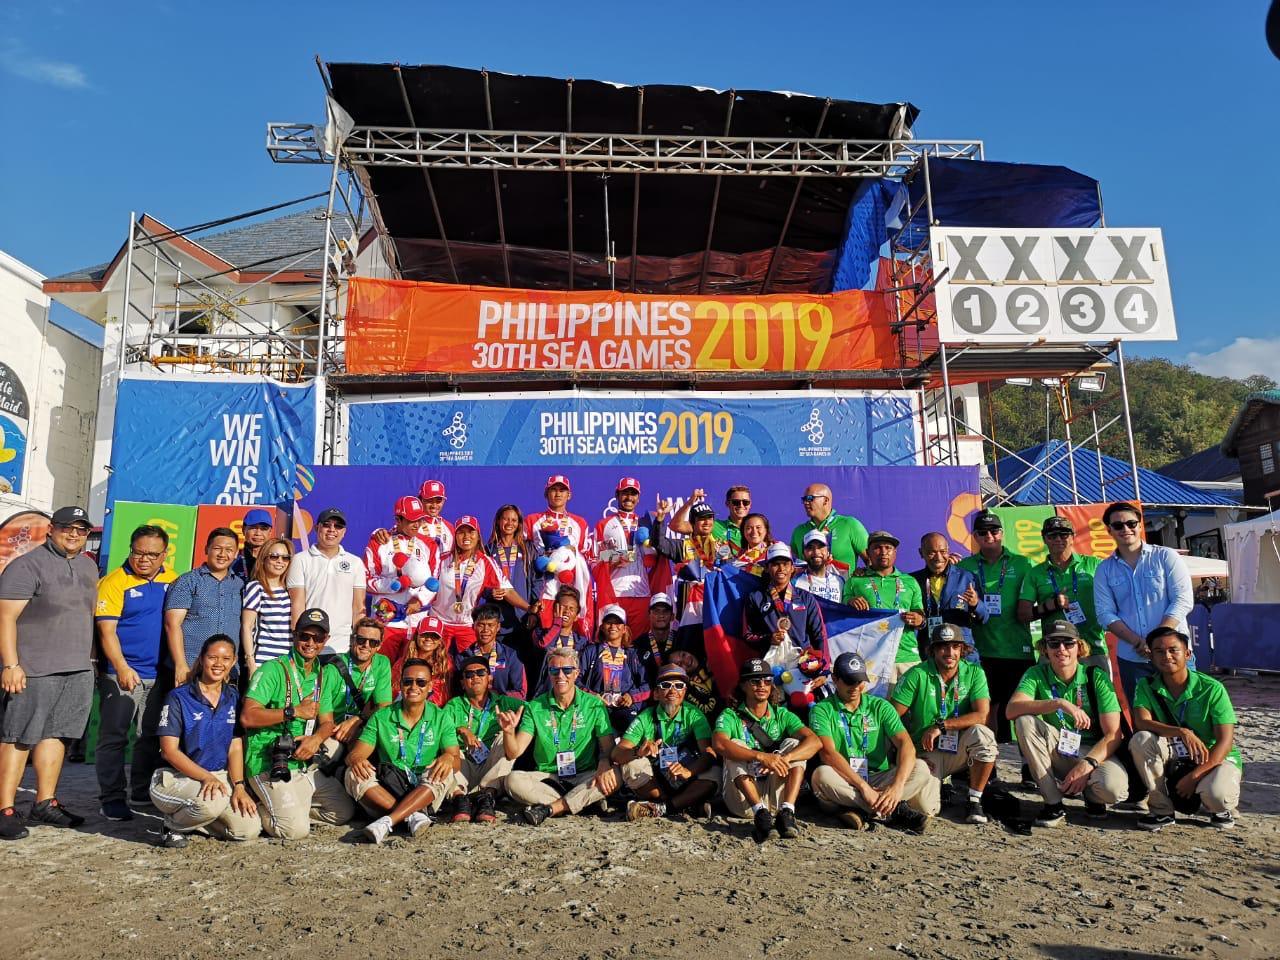 Philippines 2019 Southeast Asian Games includes Surfing